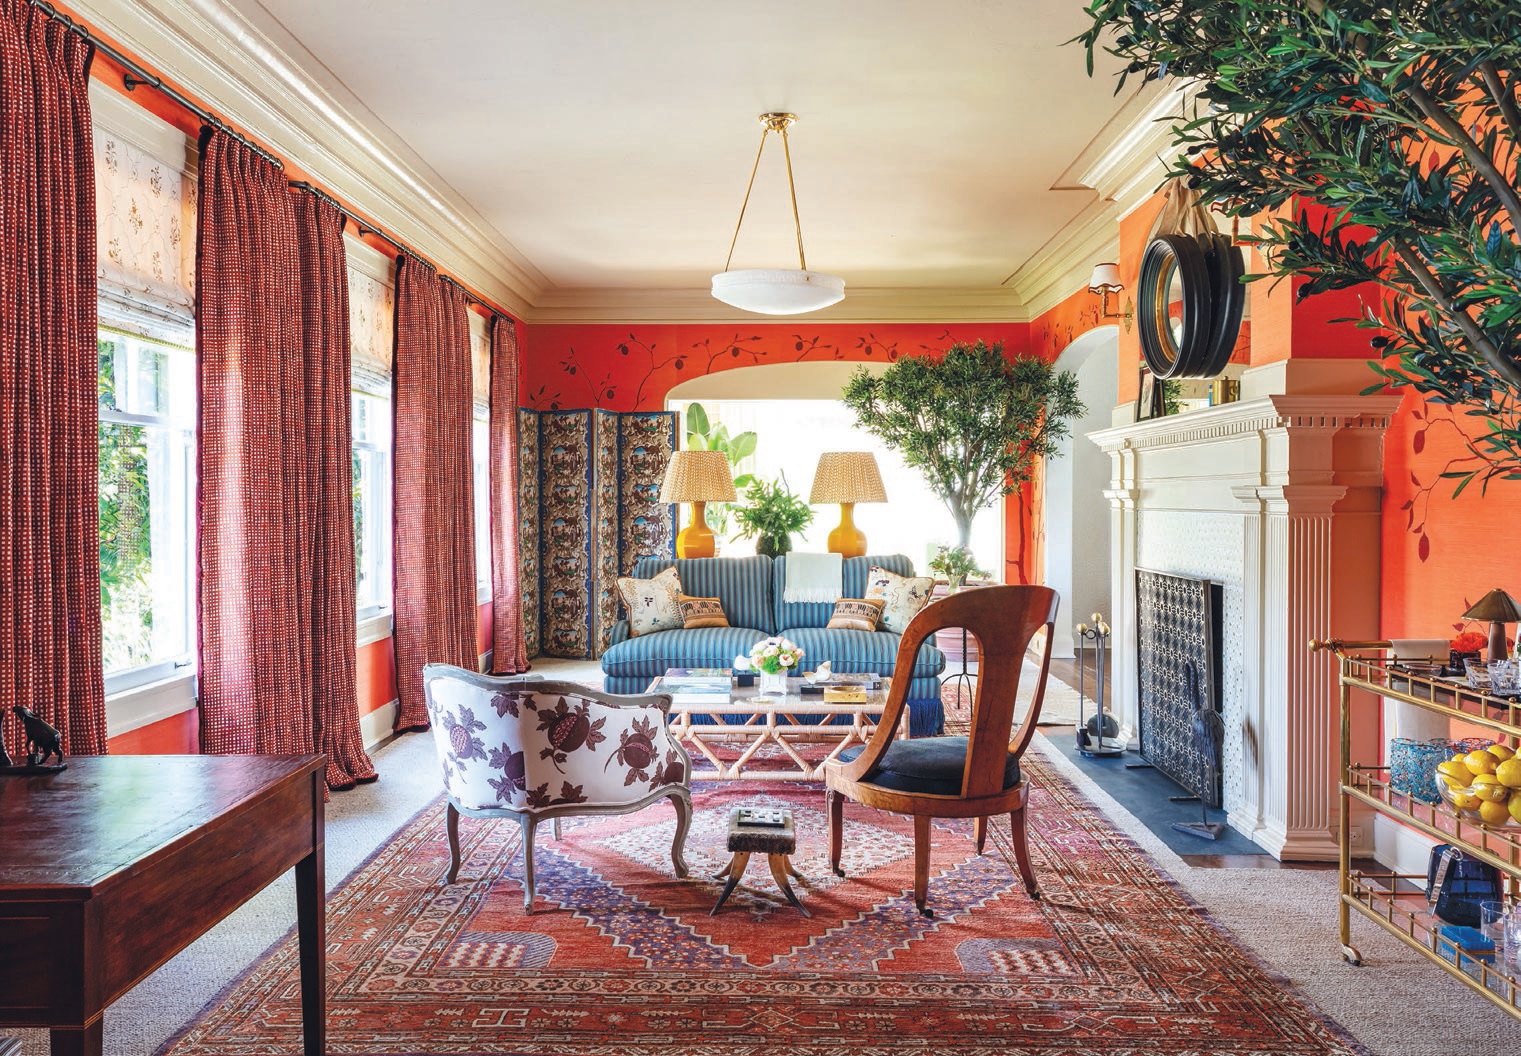 Alice Engel and Peter Pennoyer’s Drawing Room is ready to entertain at a moment’s notice. PHOTOGRAPHED BY NICKOLAS SARGENT/SARGENT PHOTOGRAPHY